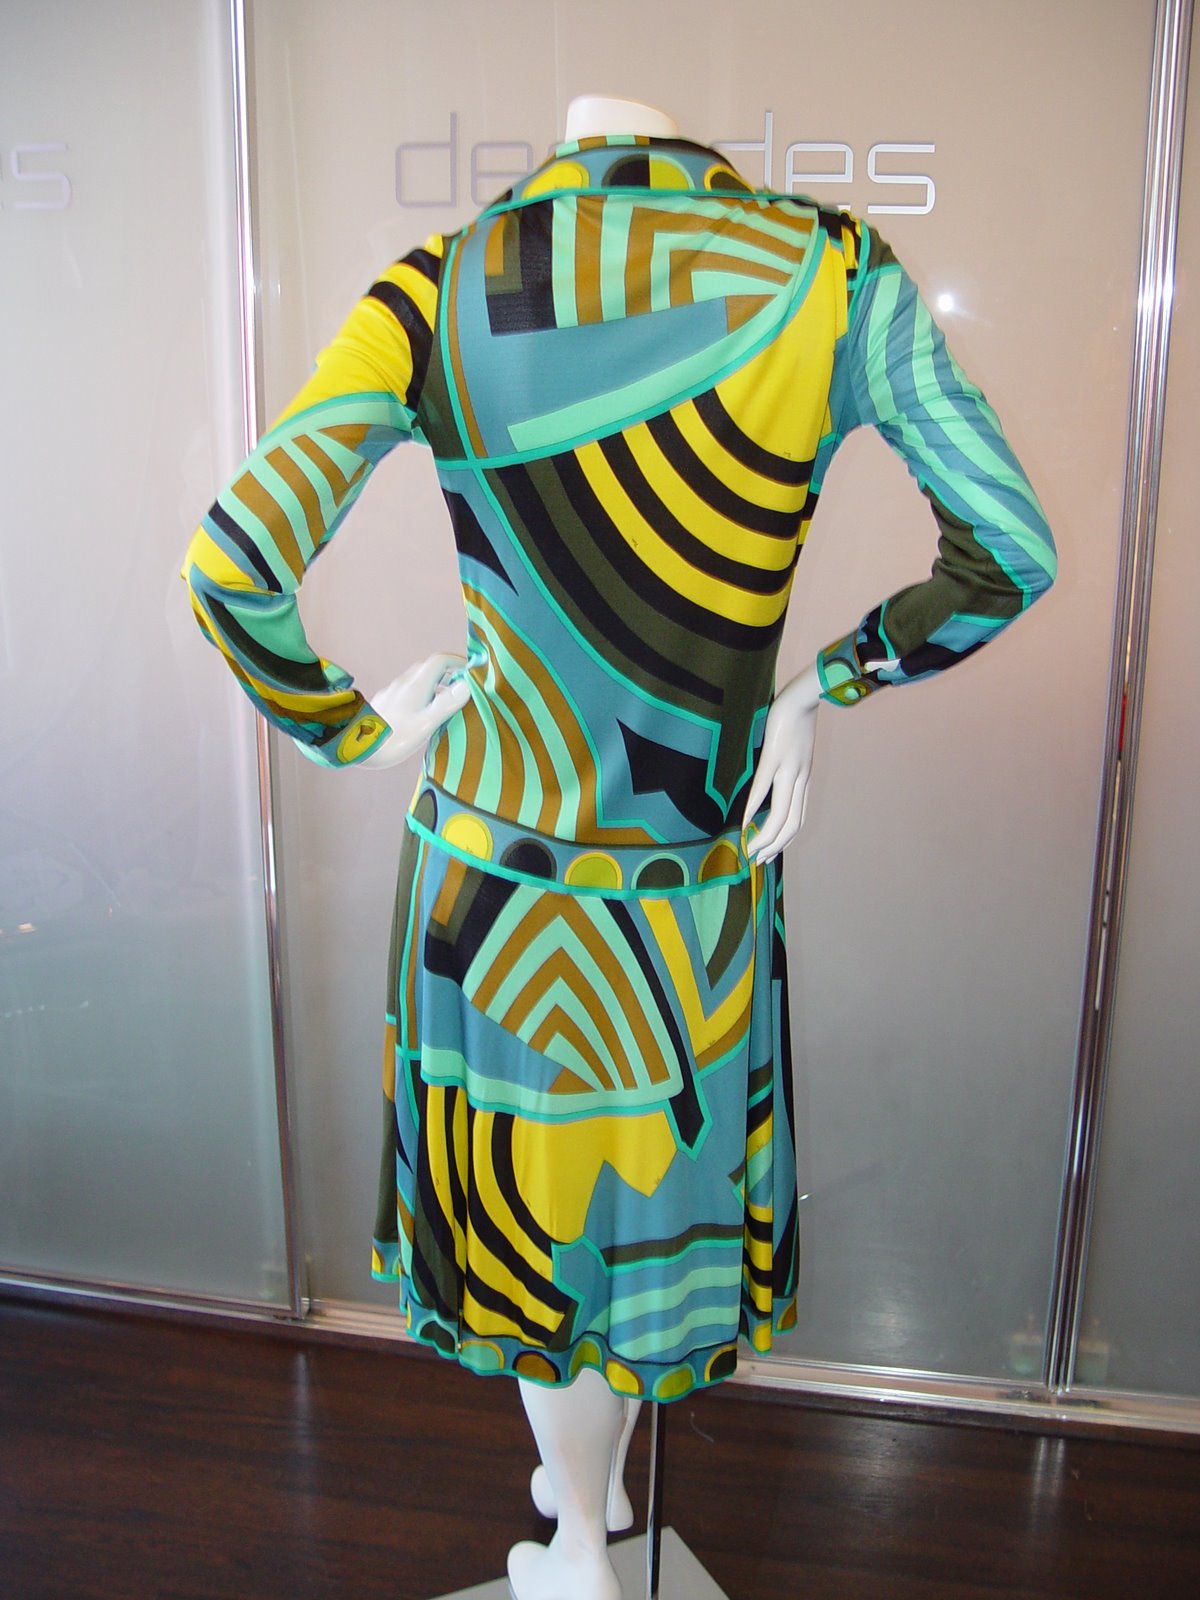 [EMILIO+PUCCI+FOR+LORD+AND+TAYLOR+BLUE+AND+ACID+YELLOW+SILK+JERSEY+SHIRTMAKER+DRESS+WITH+DROP+WAIST+MARKED+SIZE+14+C+1960.JPG+(1).JPG]